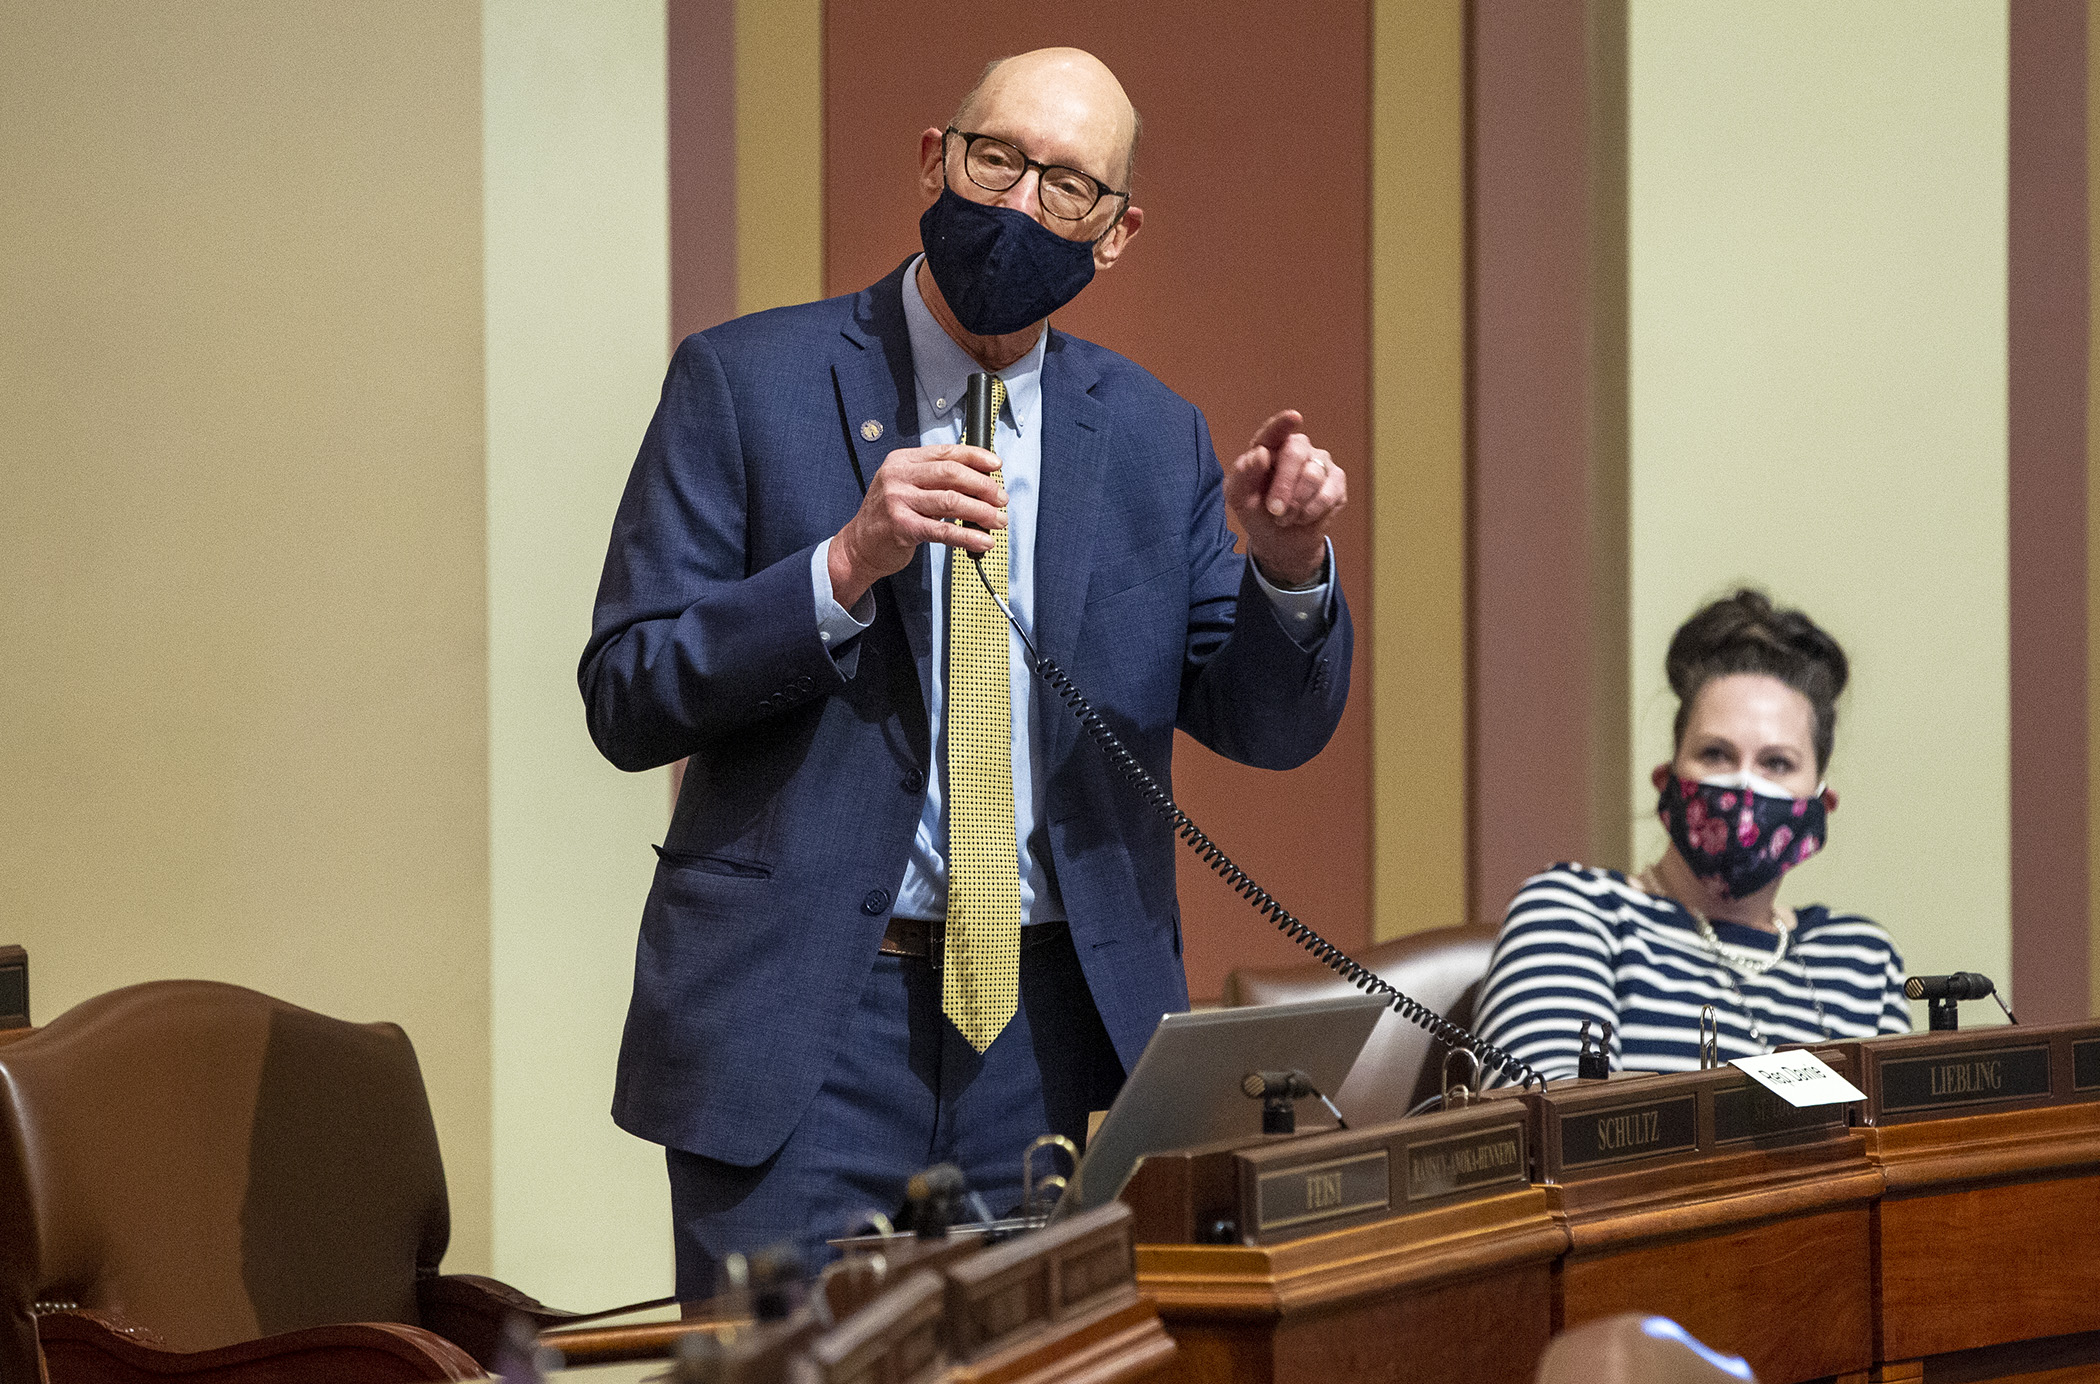 Rep. Jim Davnie, chair of the House Education Finance Committee, comments during the April 19 floor debate on the omnibus E-12 education finance and policy bill. Photo by Paul Battaglia